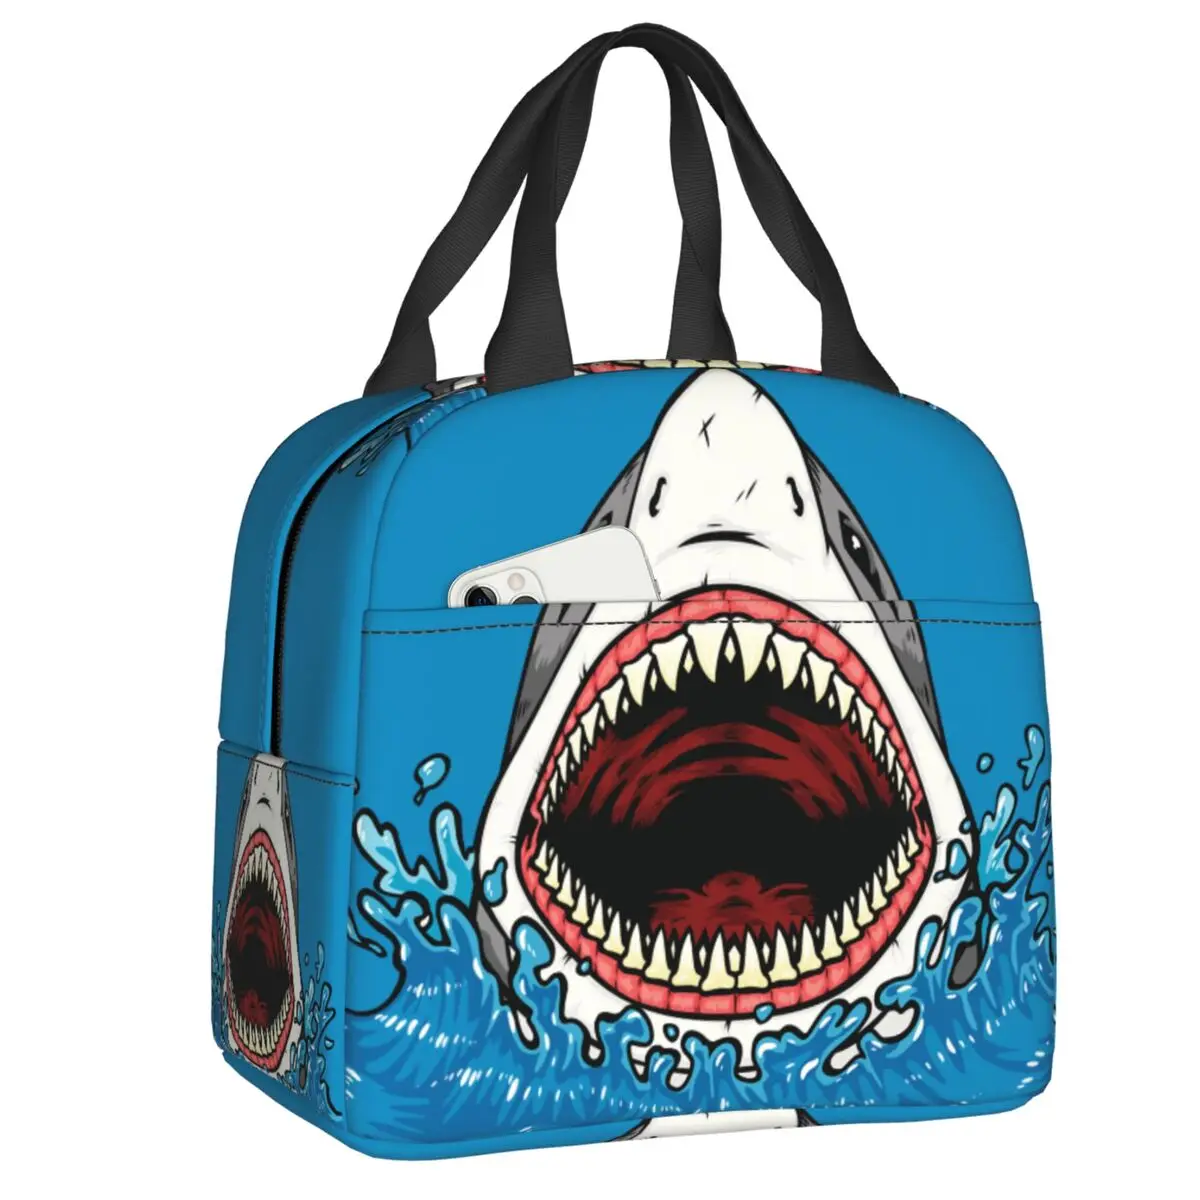 Animal Shark Lunch Bag for Women Waterproof Cooler Thermal Insulated Lunch Box Office Picnic Travel School Food Tote Bags